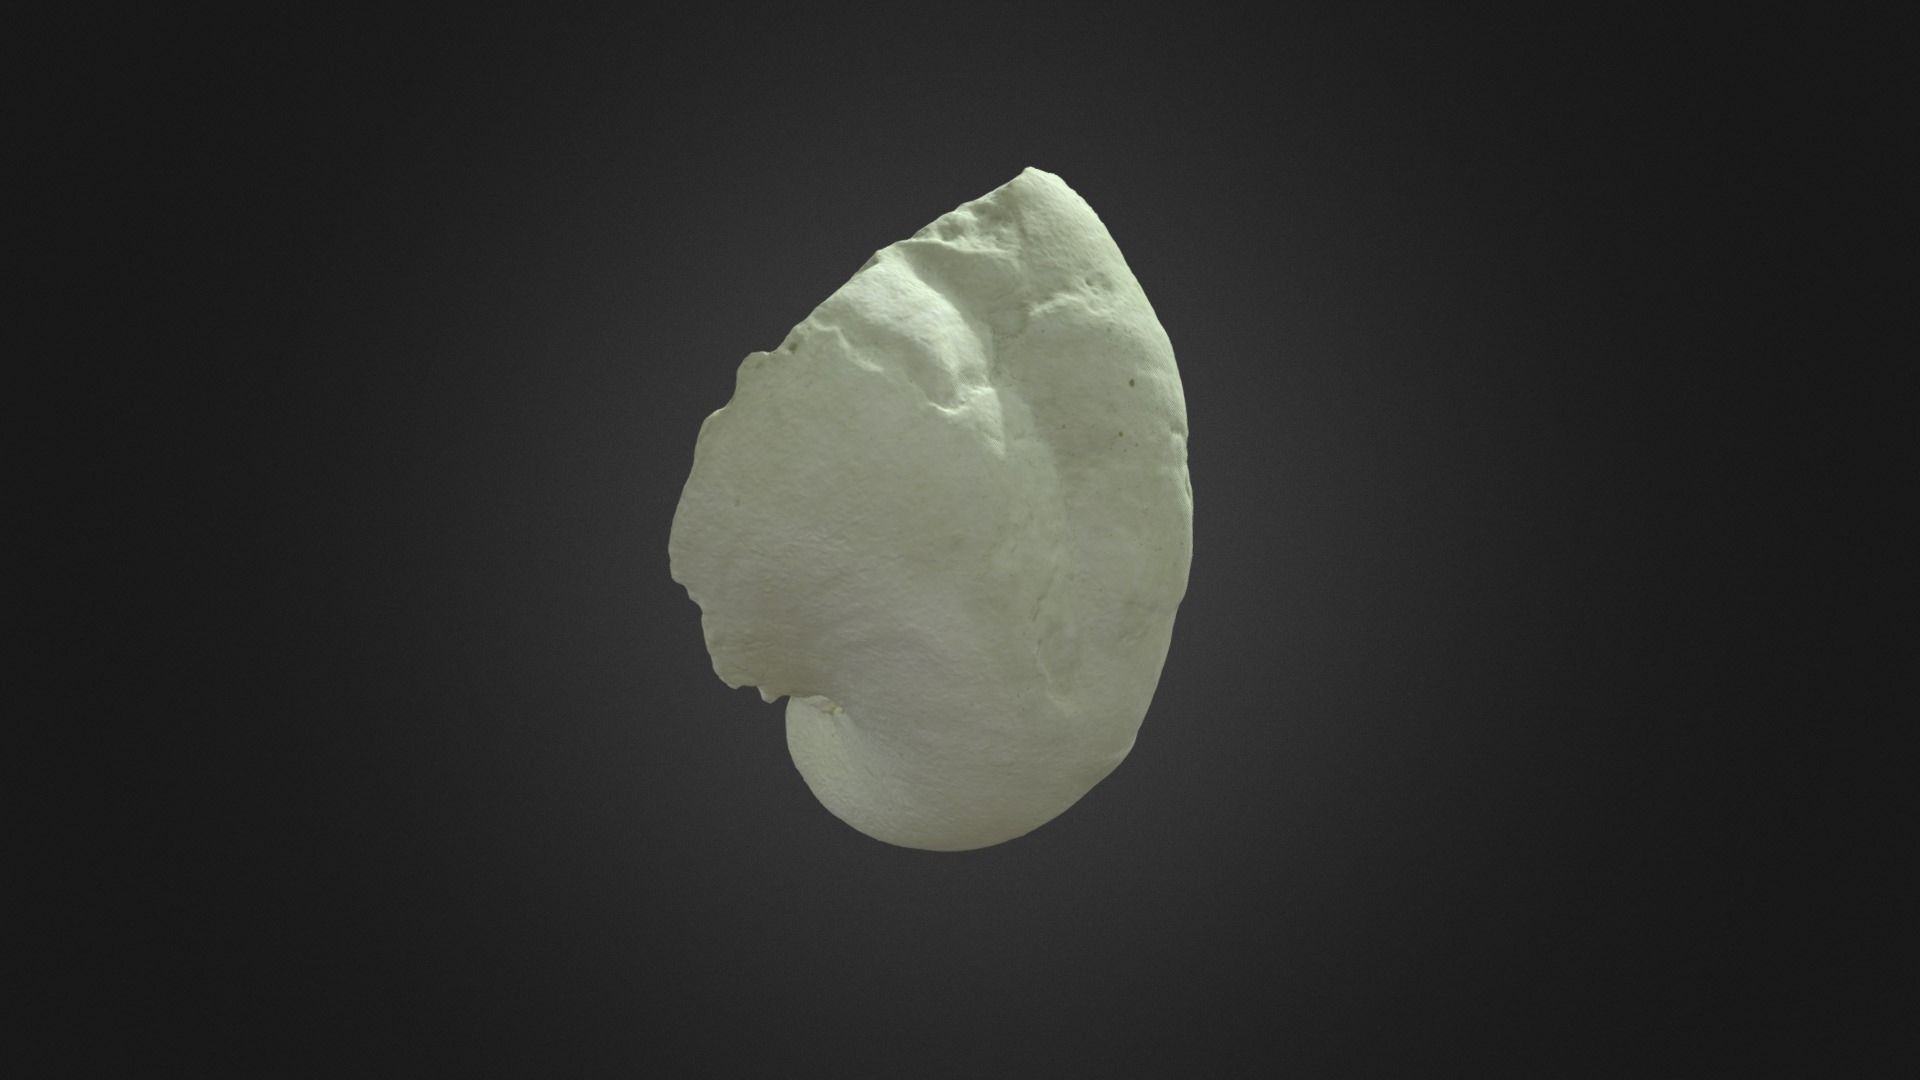 3D model Rhynchostreaon columba YPM - This is a 3D model of the Rhynchostreaon columba YPM. The 3D model is about a white moon in the sky.